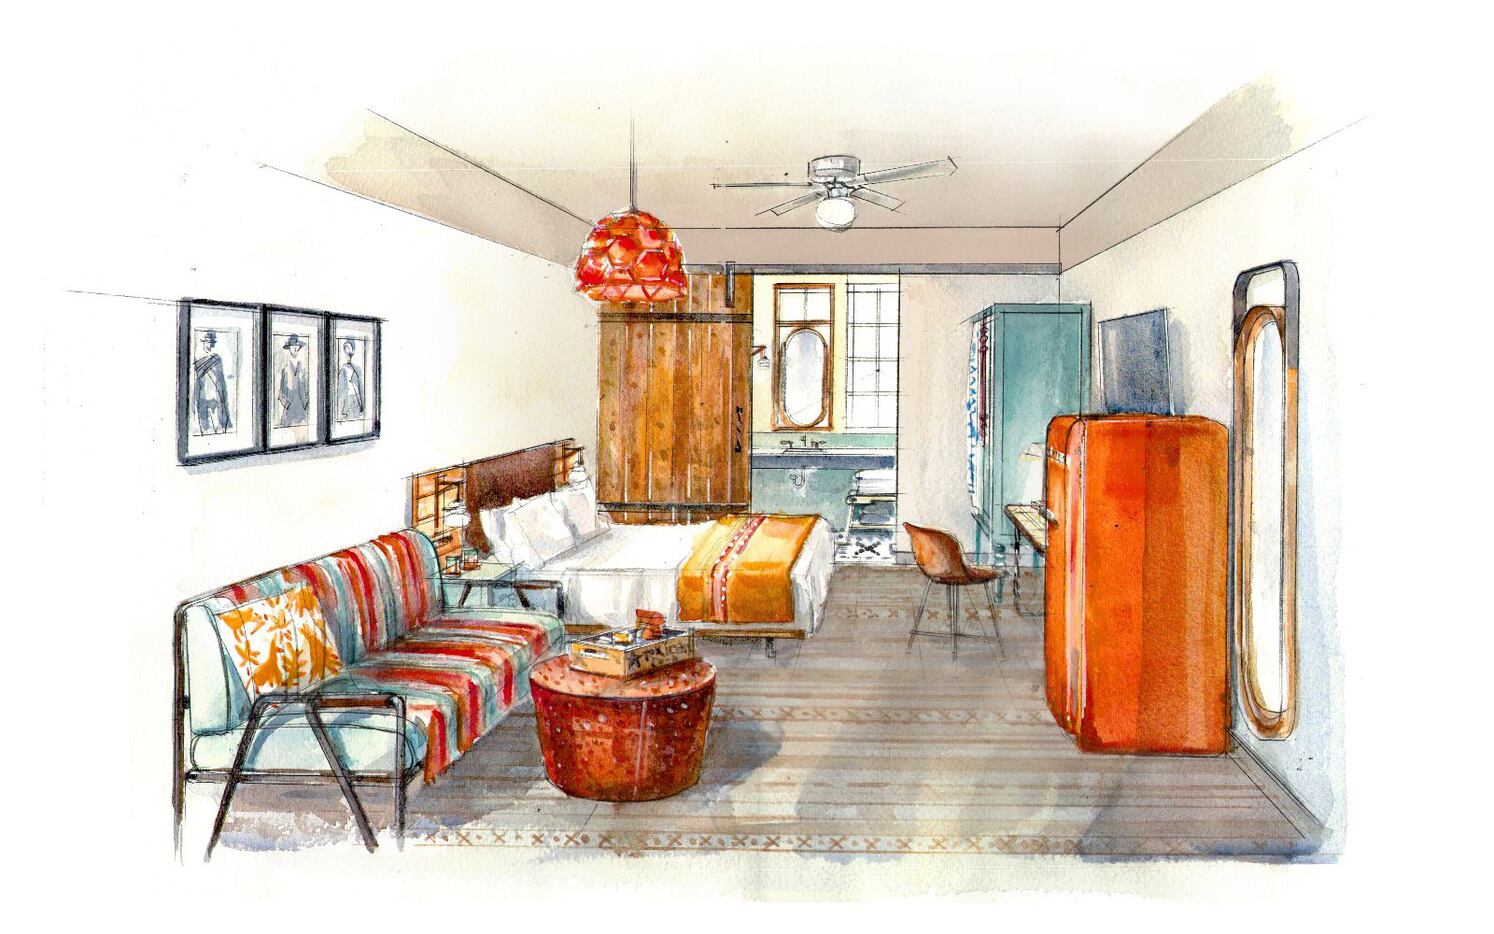 The Texican Court hotel in Irving will have interiors with a Texas and Southwestern style.